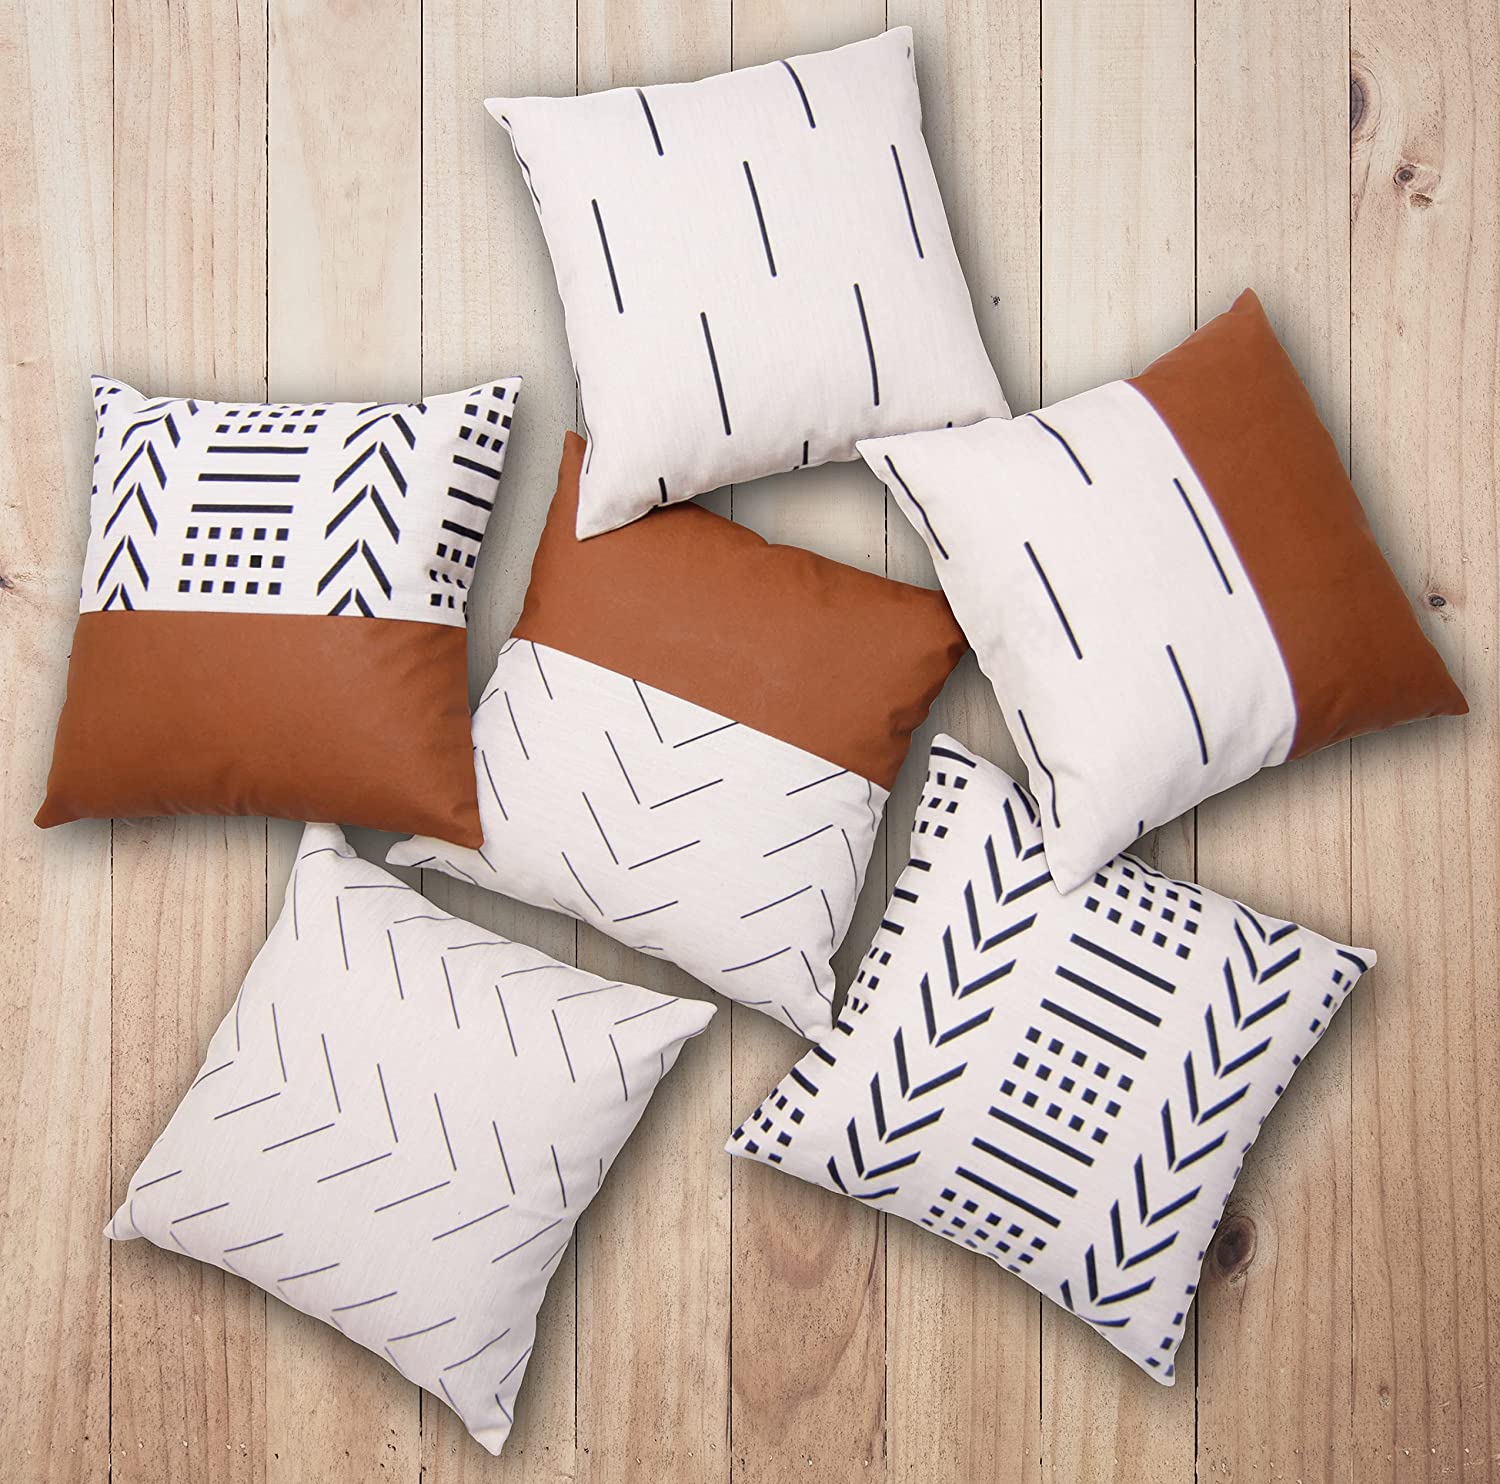 EFOLKI Boho Throw Pillow Covers for Couch and Bed 18x18 Set of 6, Boho  Decor,Fal